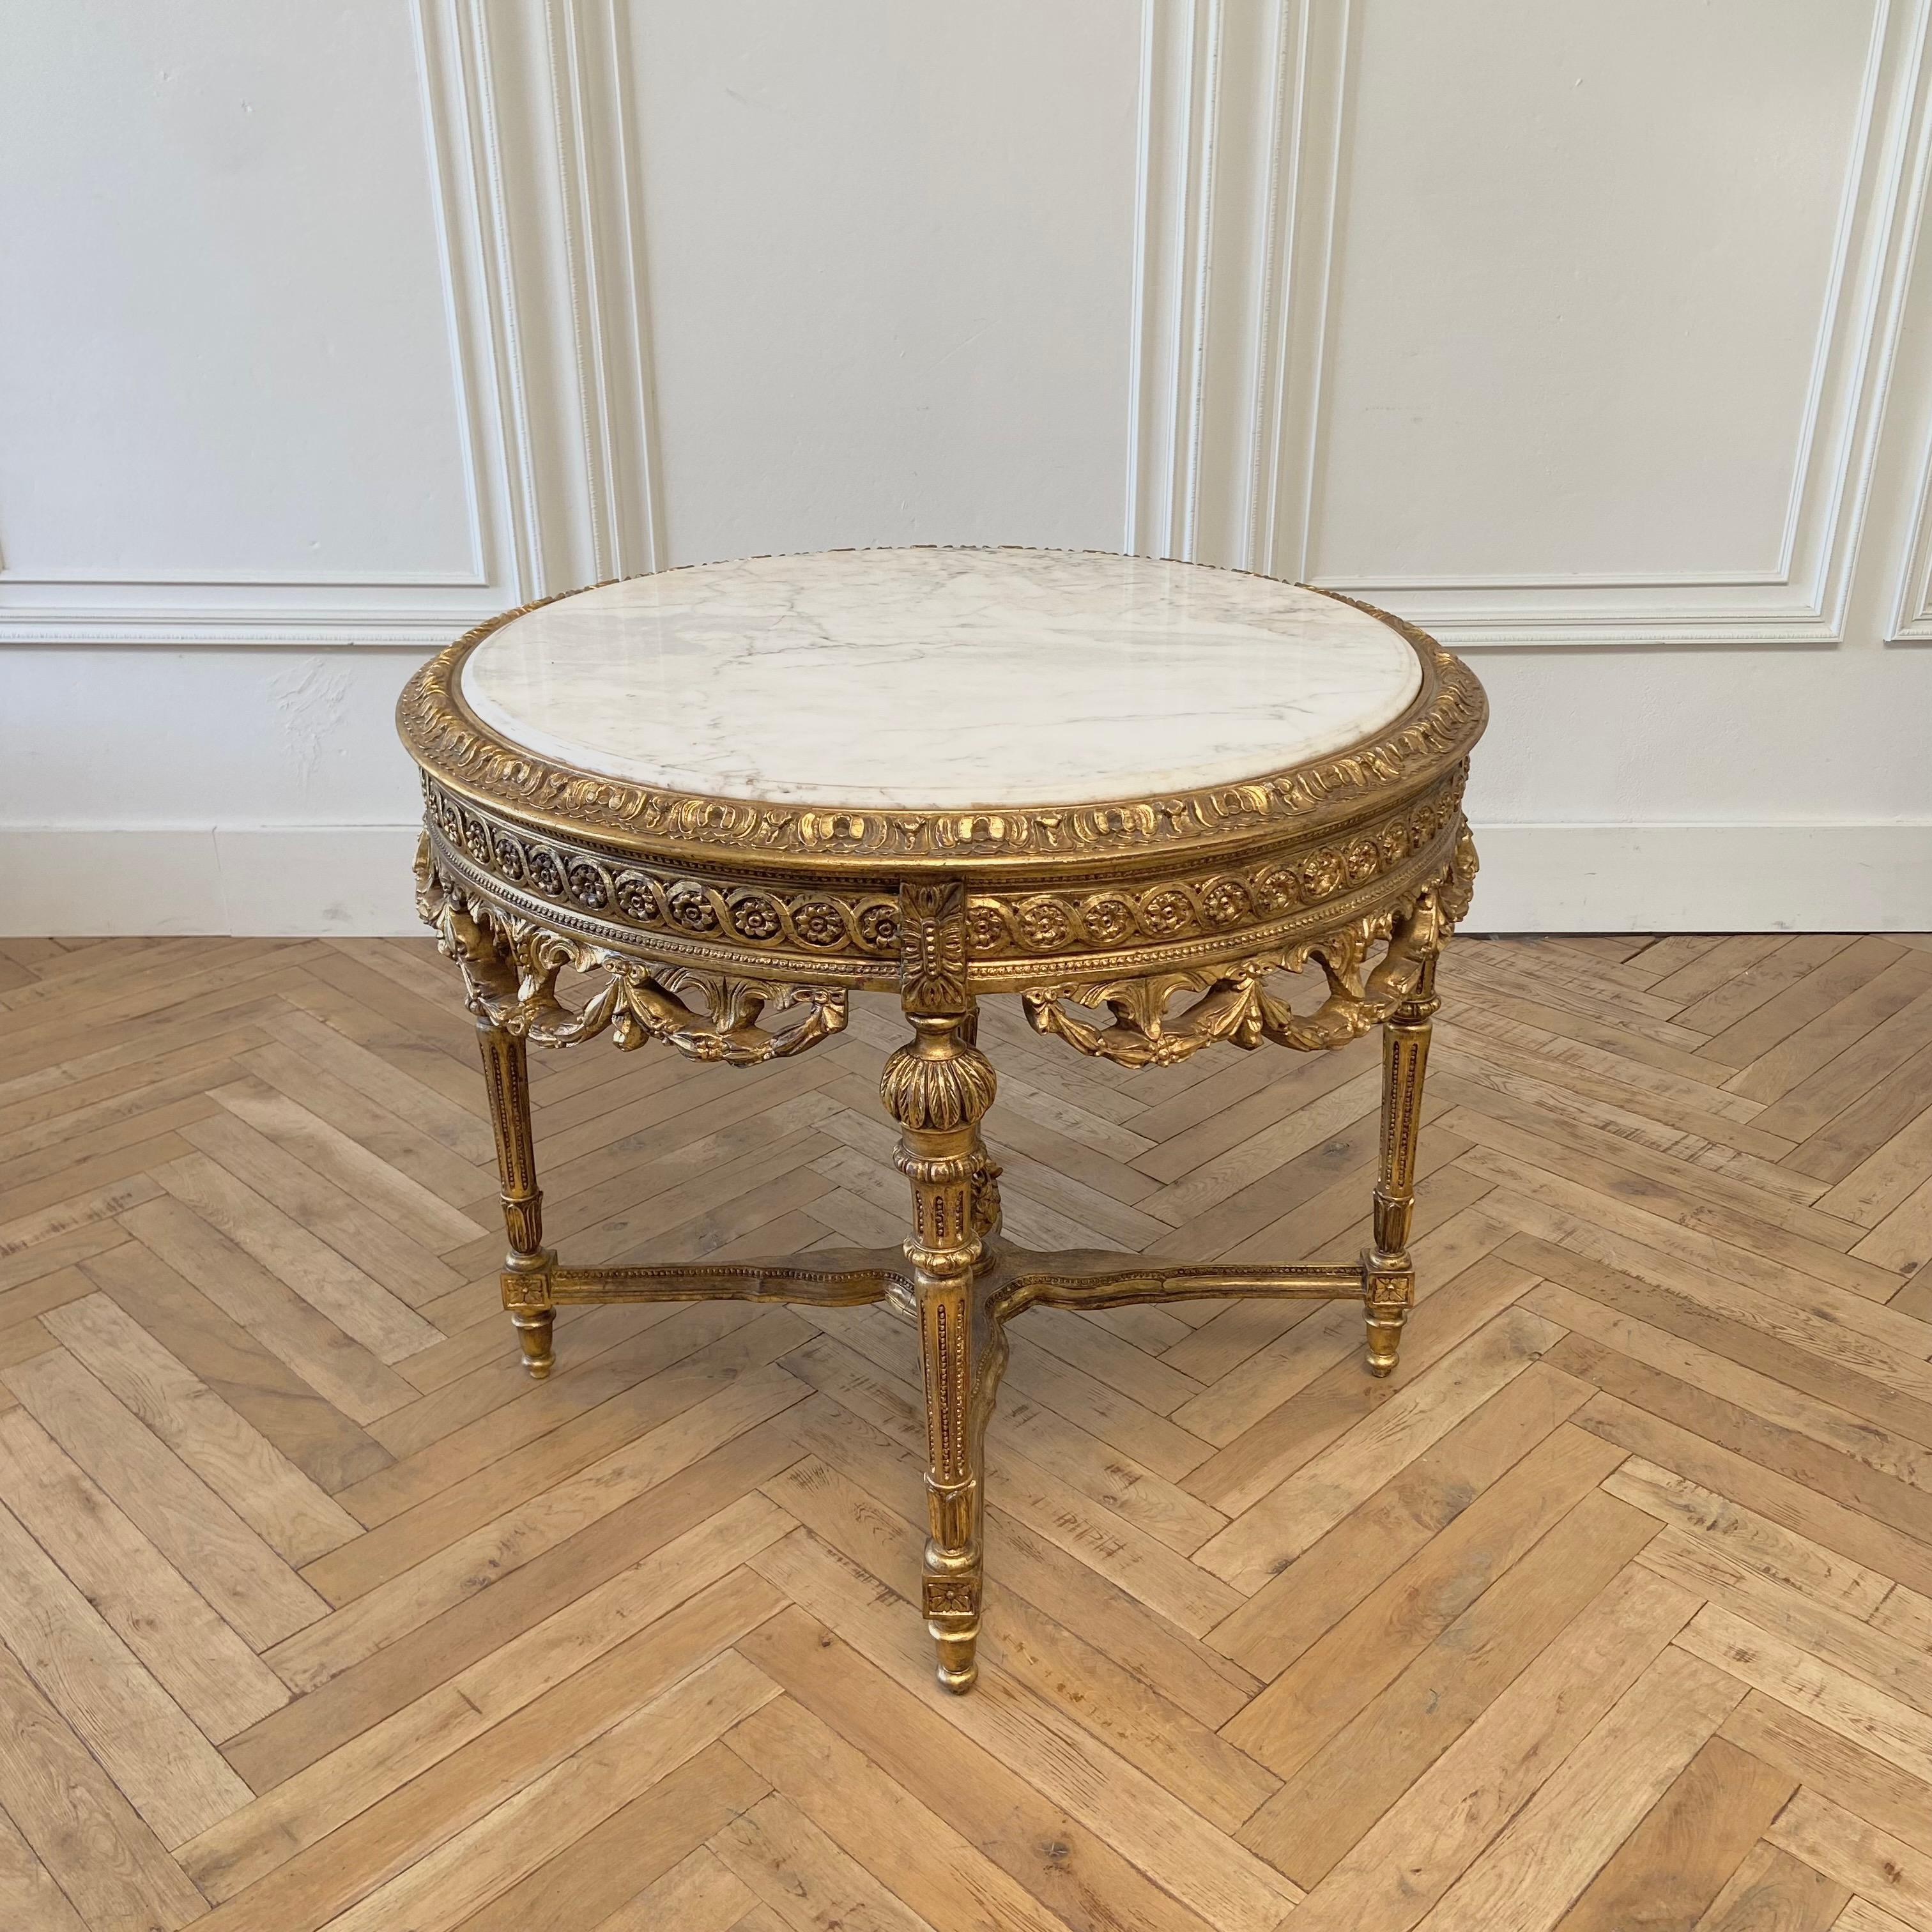 Louis XVI 20th Century Round Gilt Wood Center Table with White Marble Top